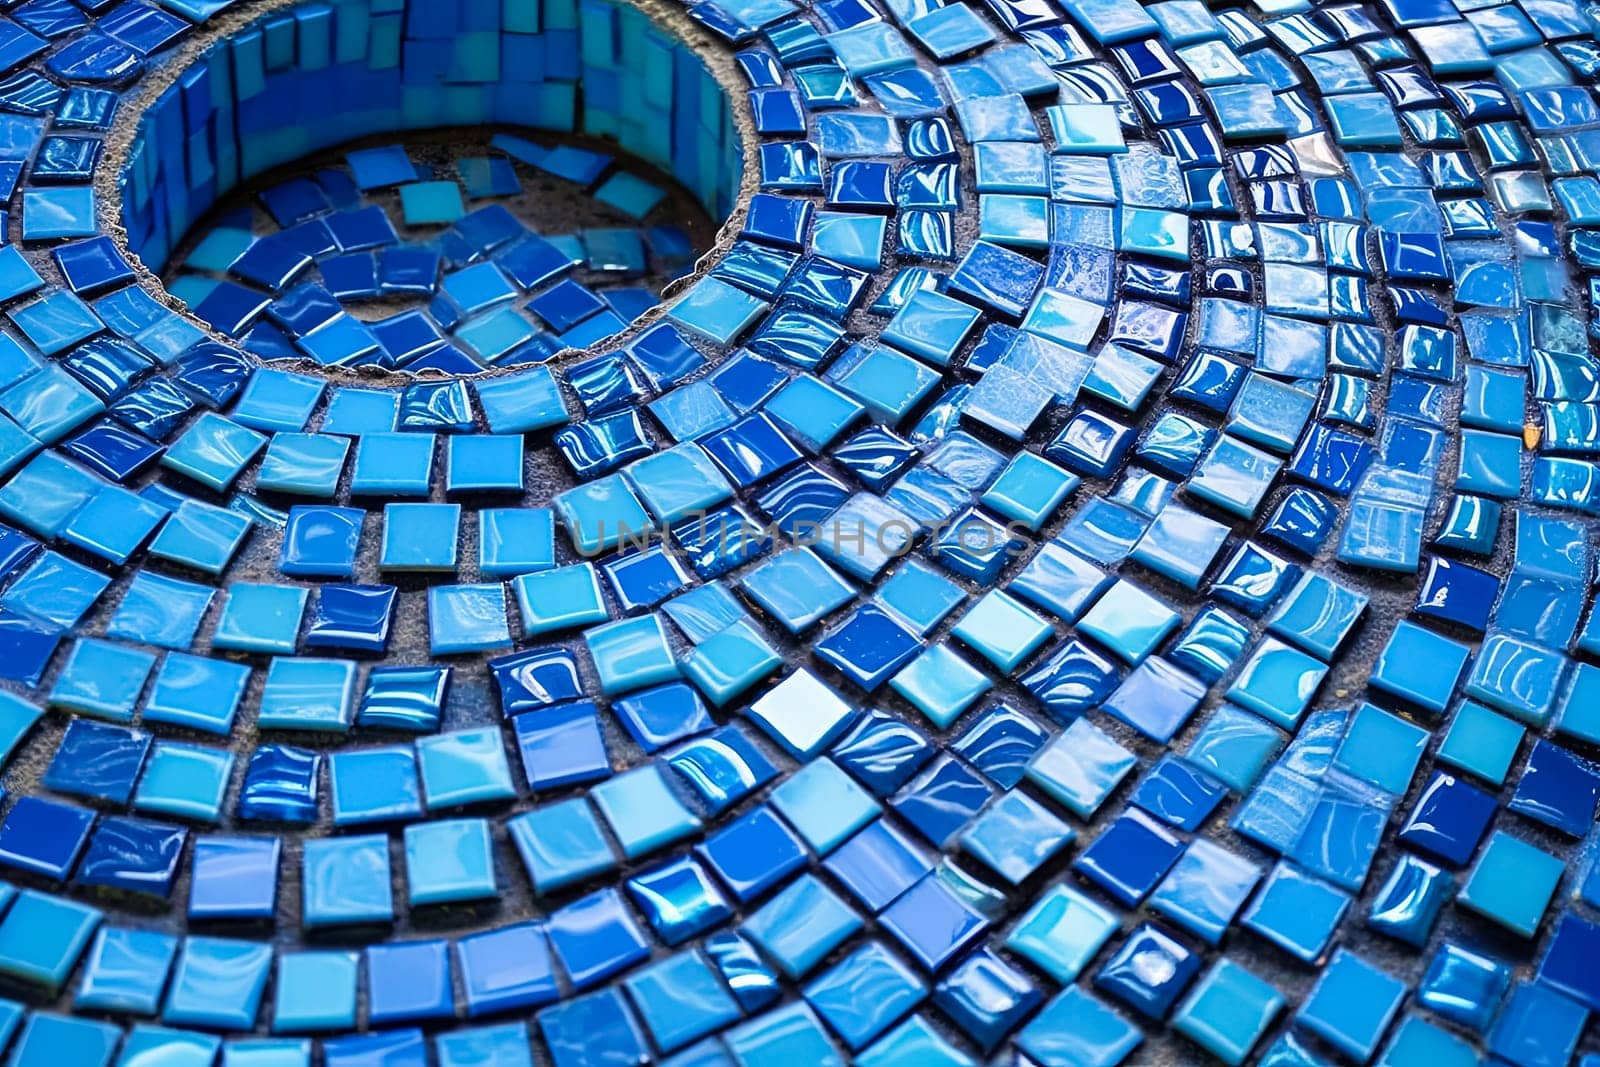 A blue mosaic tile wall with a blue and white swirl pattern. The tiles are blue and white and are arranged in a way that creates a sense of movement and depth